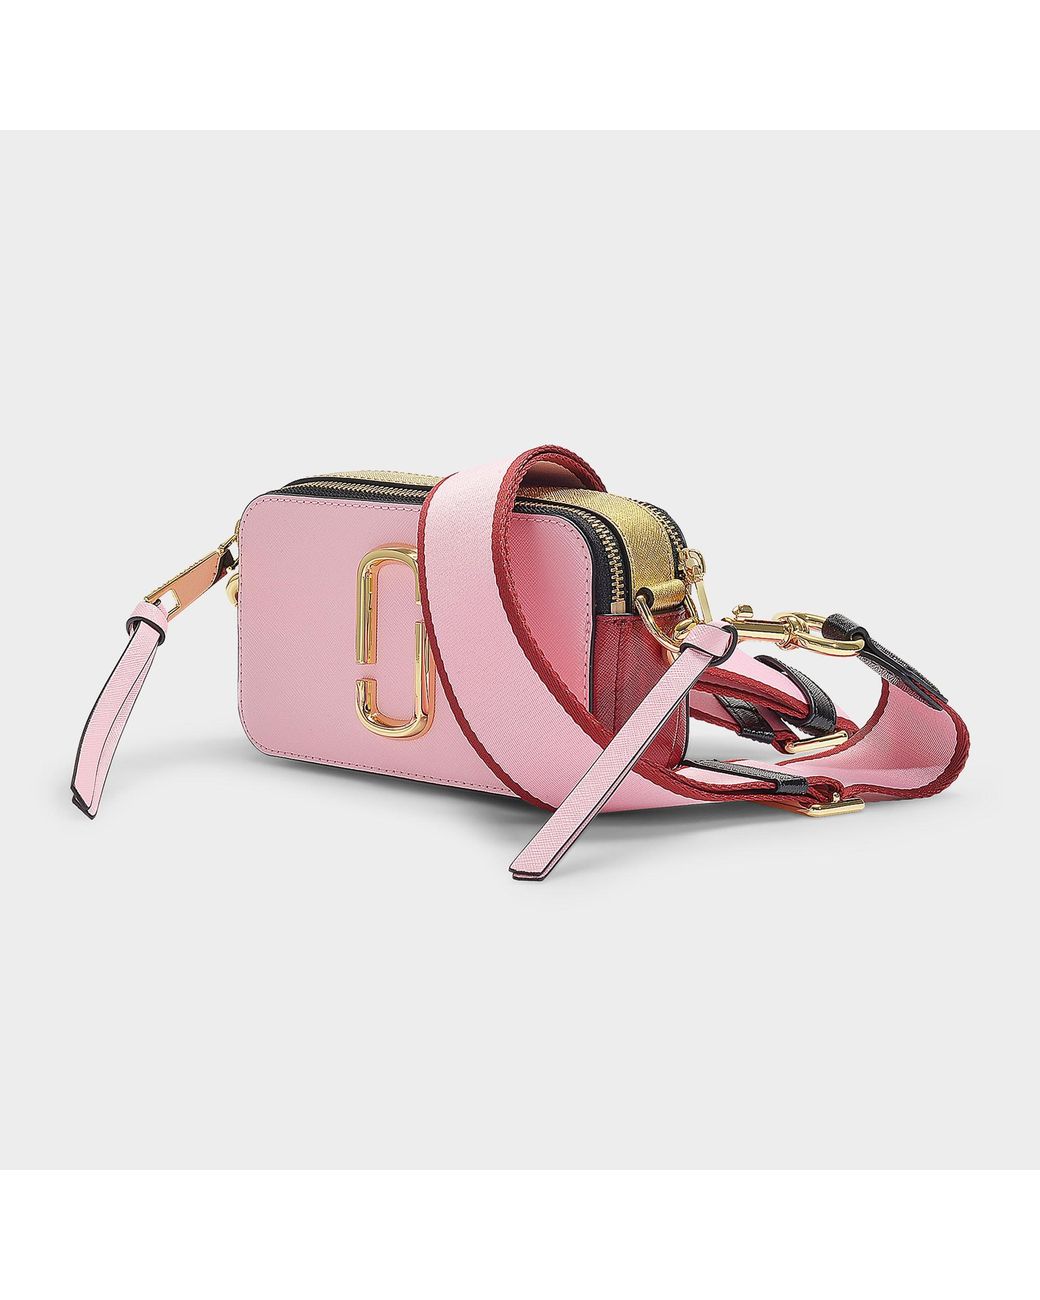 3D model Marc Jacobs Snapshot Bag Leather Pink VR / AR / low-poly